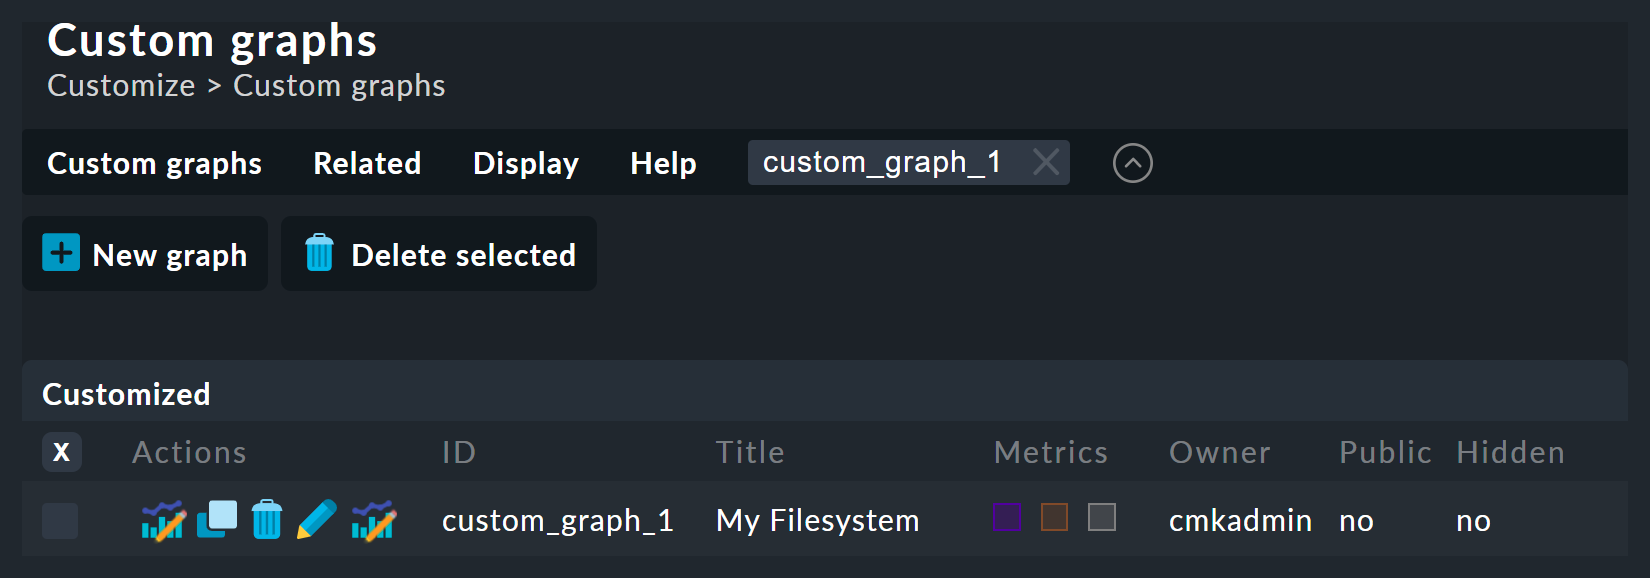 Overview of custom graphs.